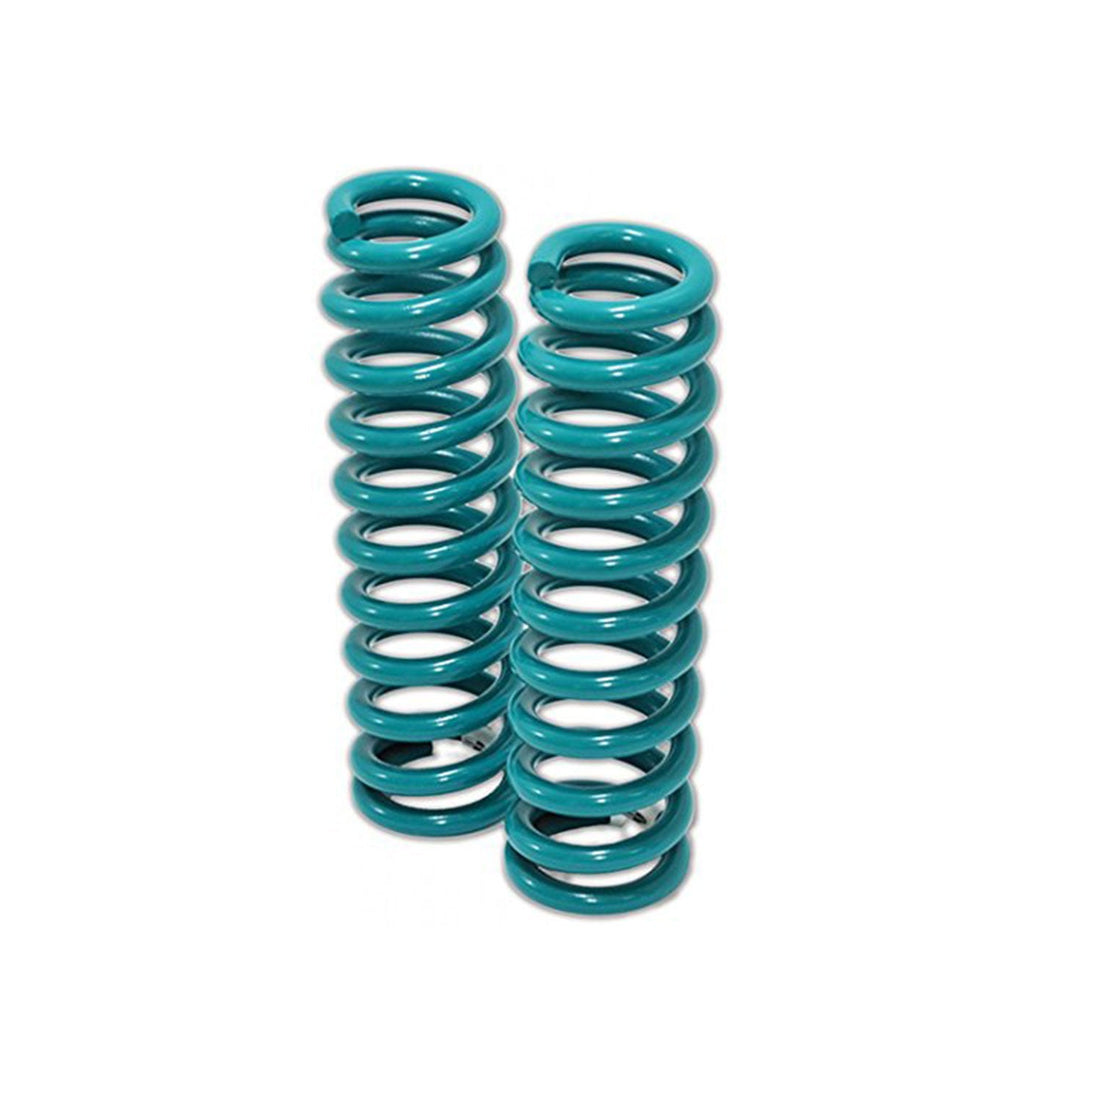 Dobinsons Rear Coil Springs for Toyota Land Cruiser 80 series 1990-1997 6" Lift linear Rate with 220LBS Load(C59-319)